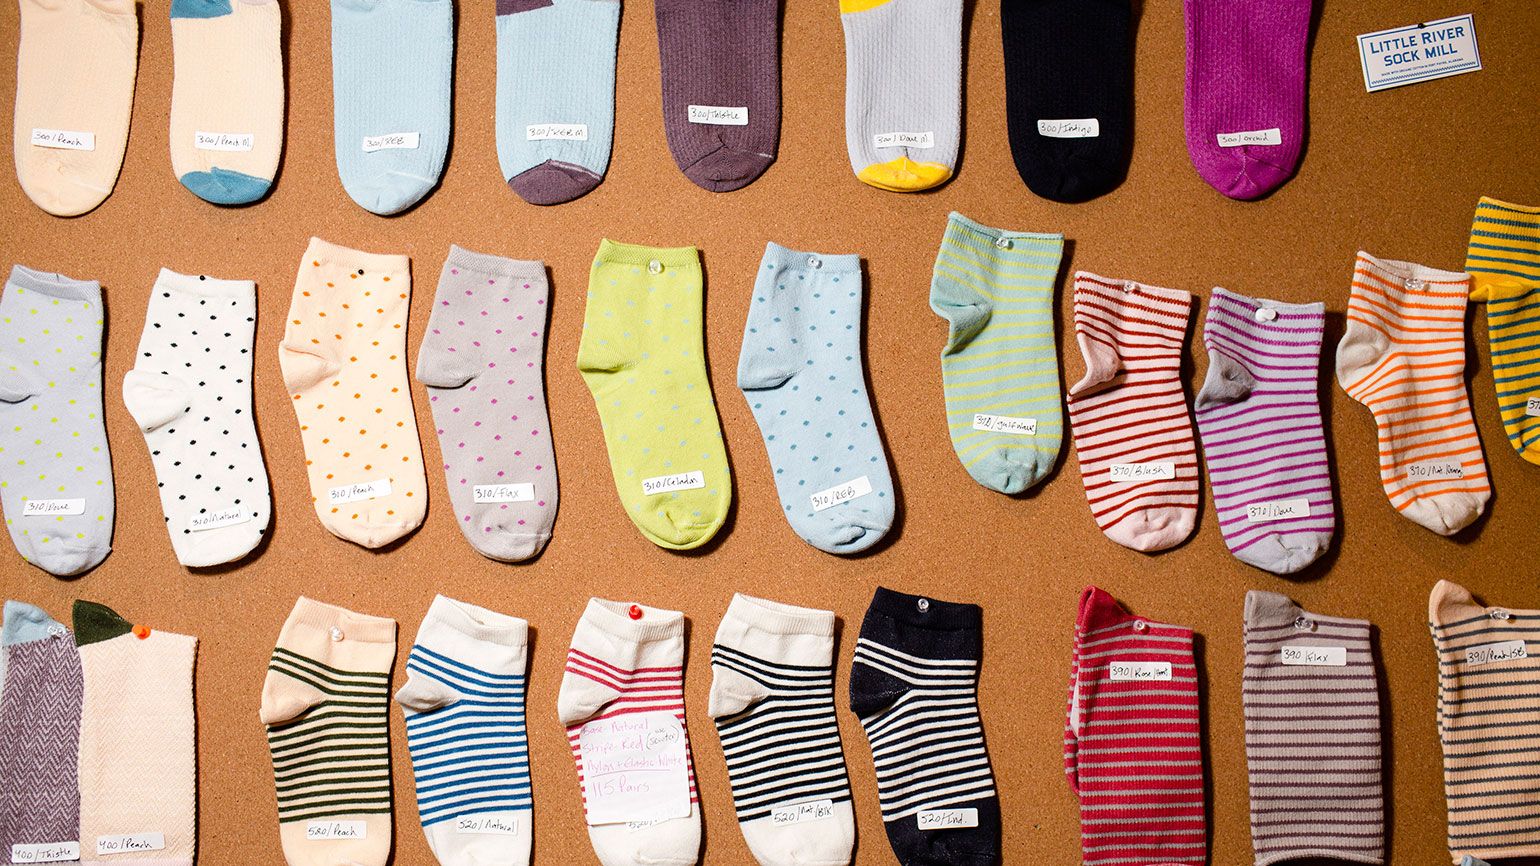 A board of socks hangs in Gina's office. Gina has transformed her parents' sock business, at the Emi-G Knitting mill in Fort Payne, Alabama.